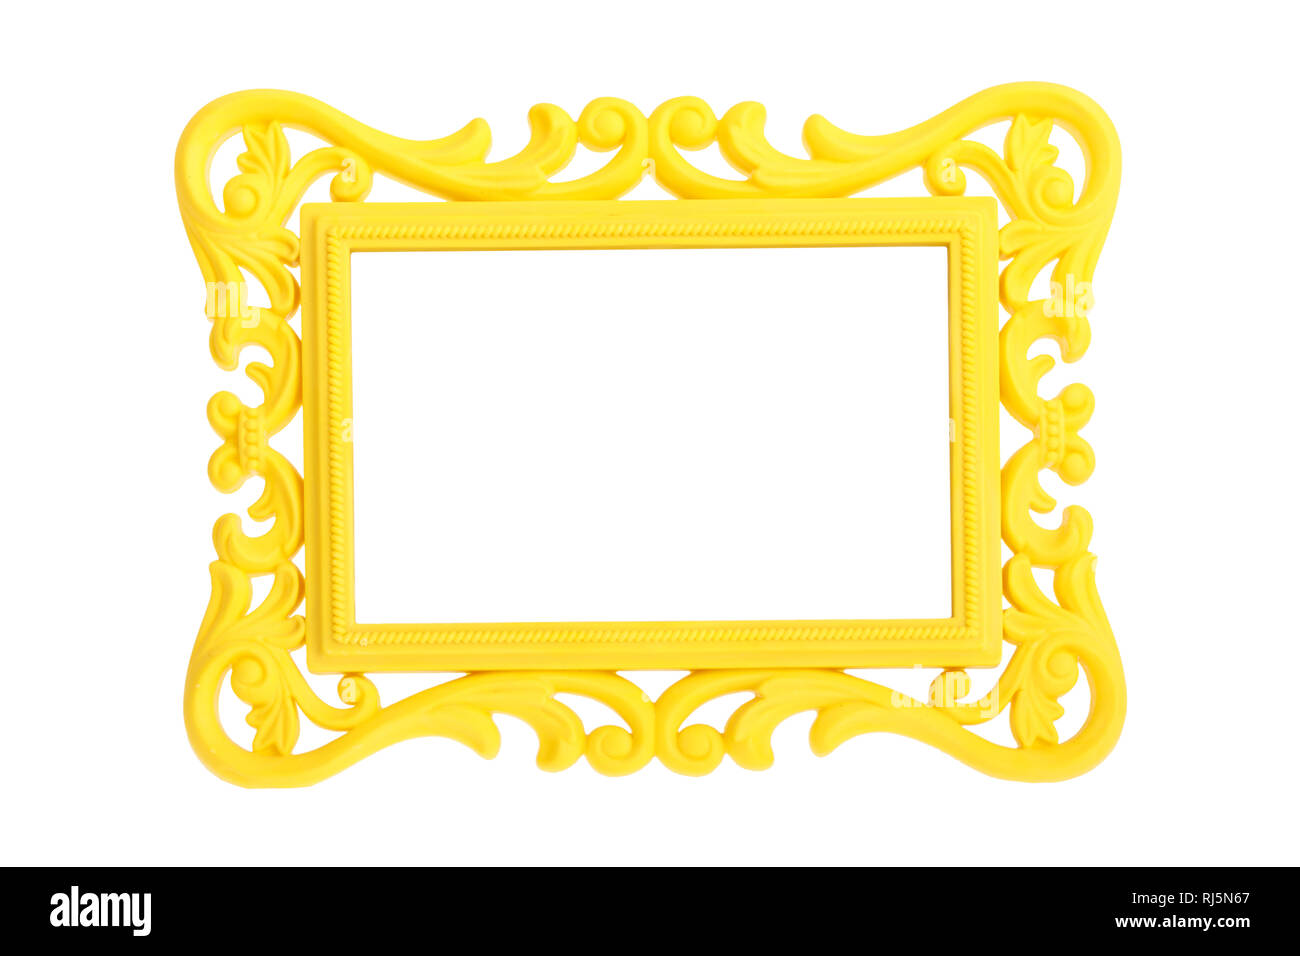 Modern plastic bright yellow picture frame with antique styling isolated on white background. Stock Photo